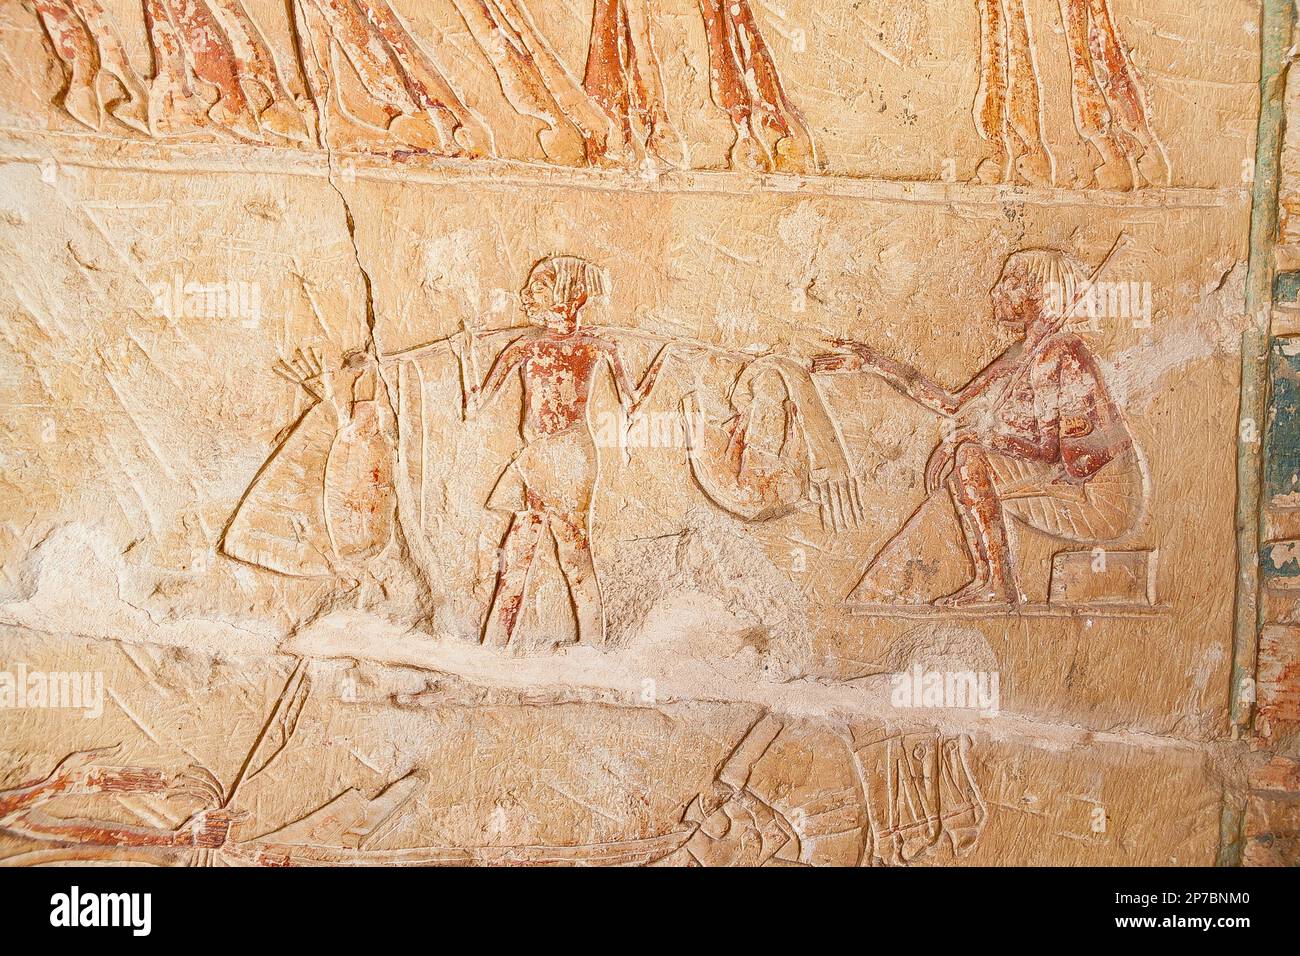 Egypt, Saqqara,  tomb of Horemheb,  inner room, East Wall South side, an officer and a servant bringing water. Stock Photo